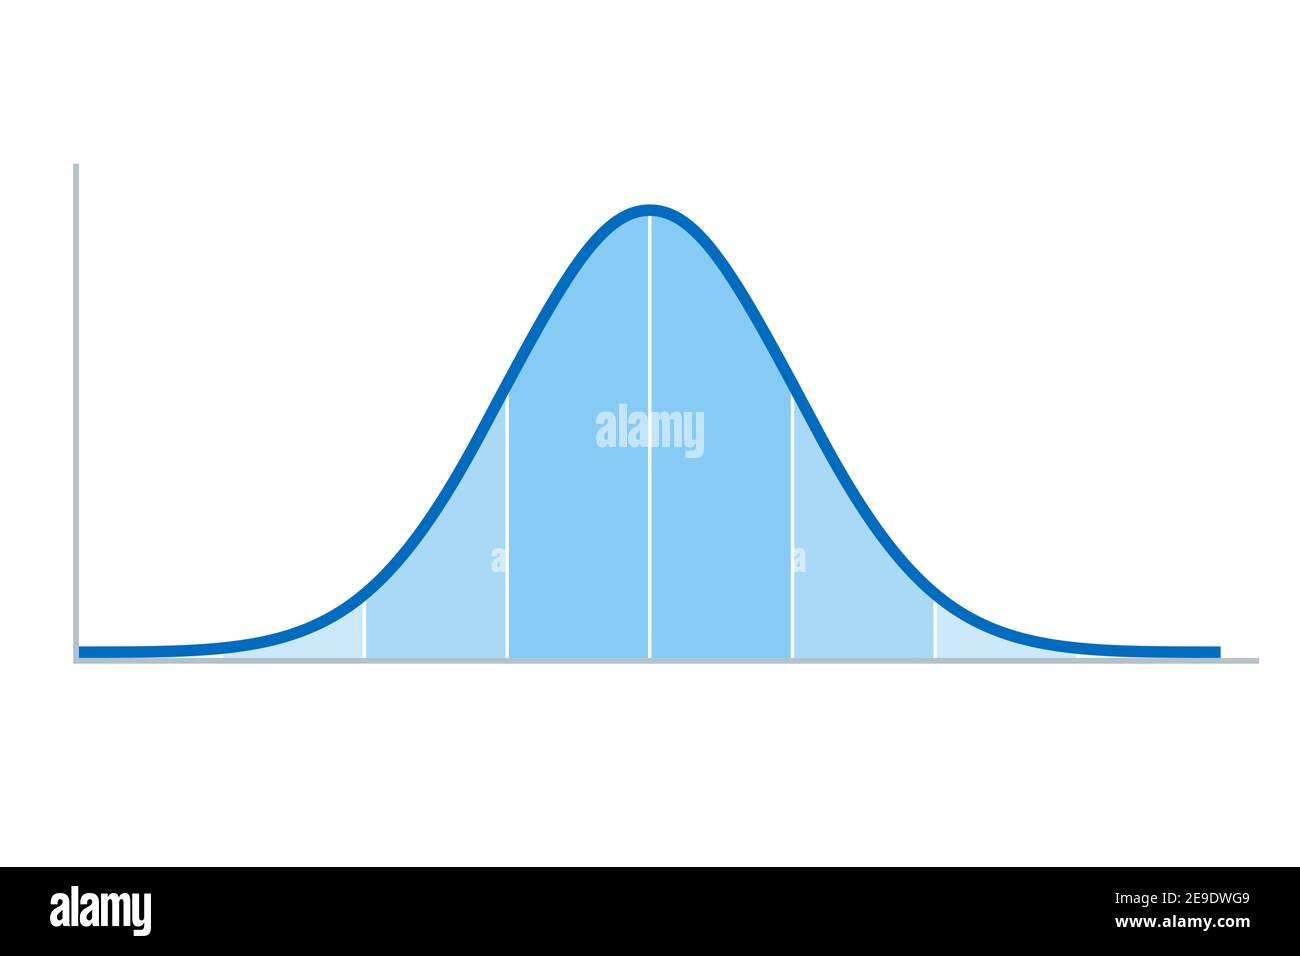 Gaussian distribution. Standard normal distribution, sometimes informally called a bell curve, used in probability theory and statistics. Stock Photo